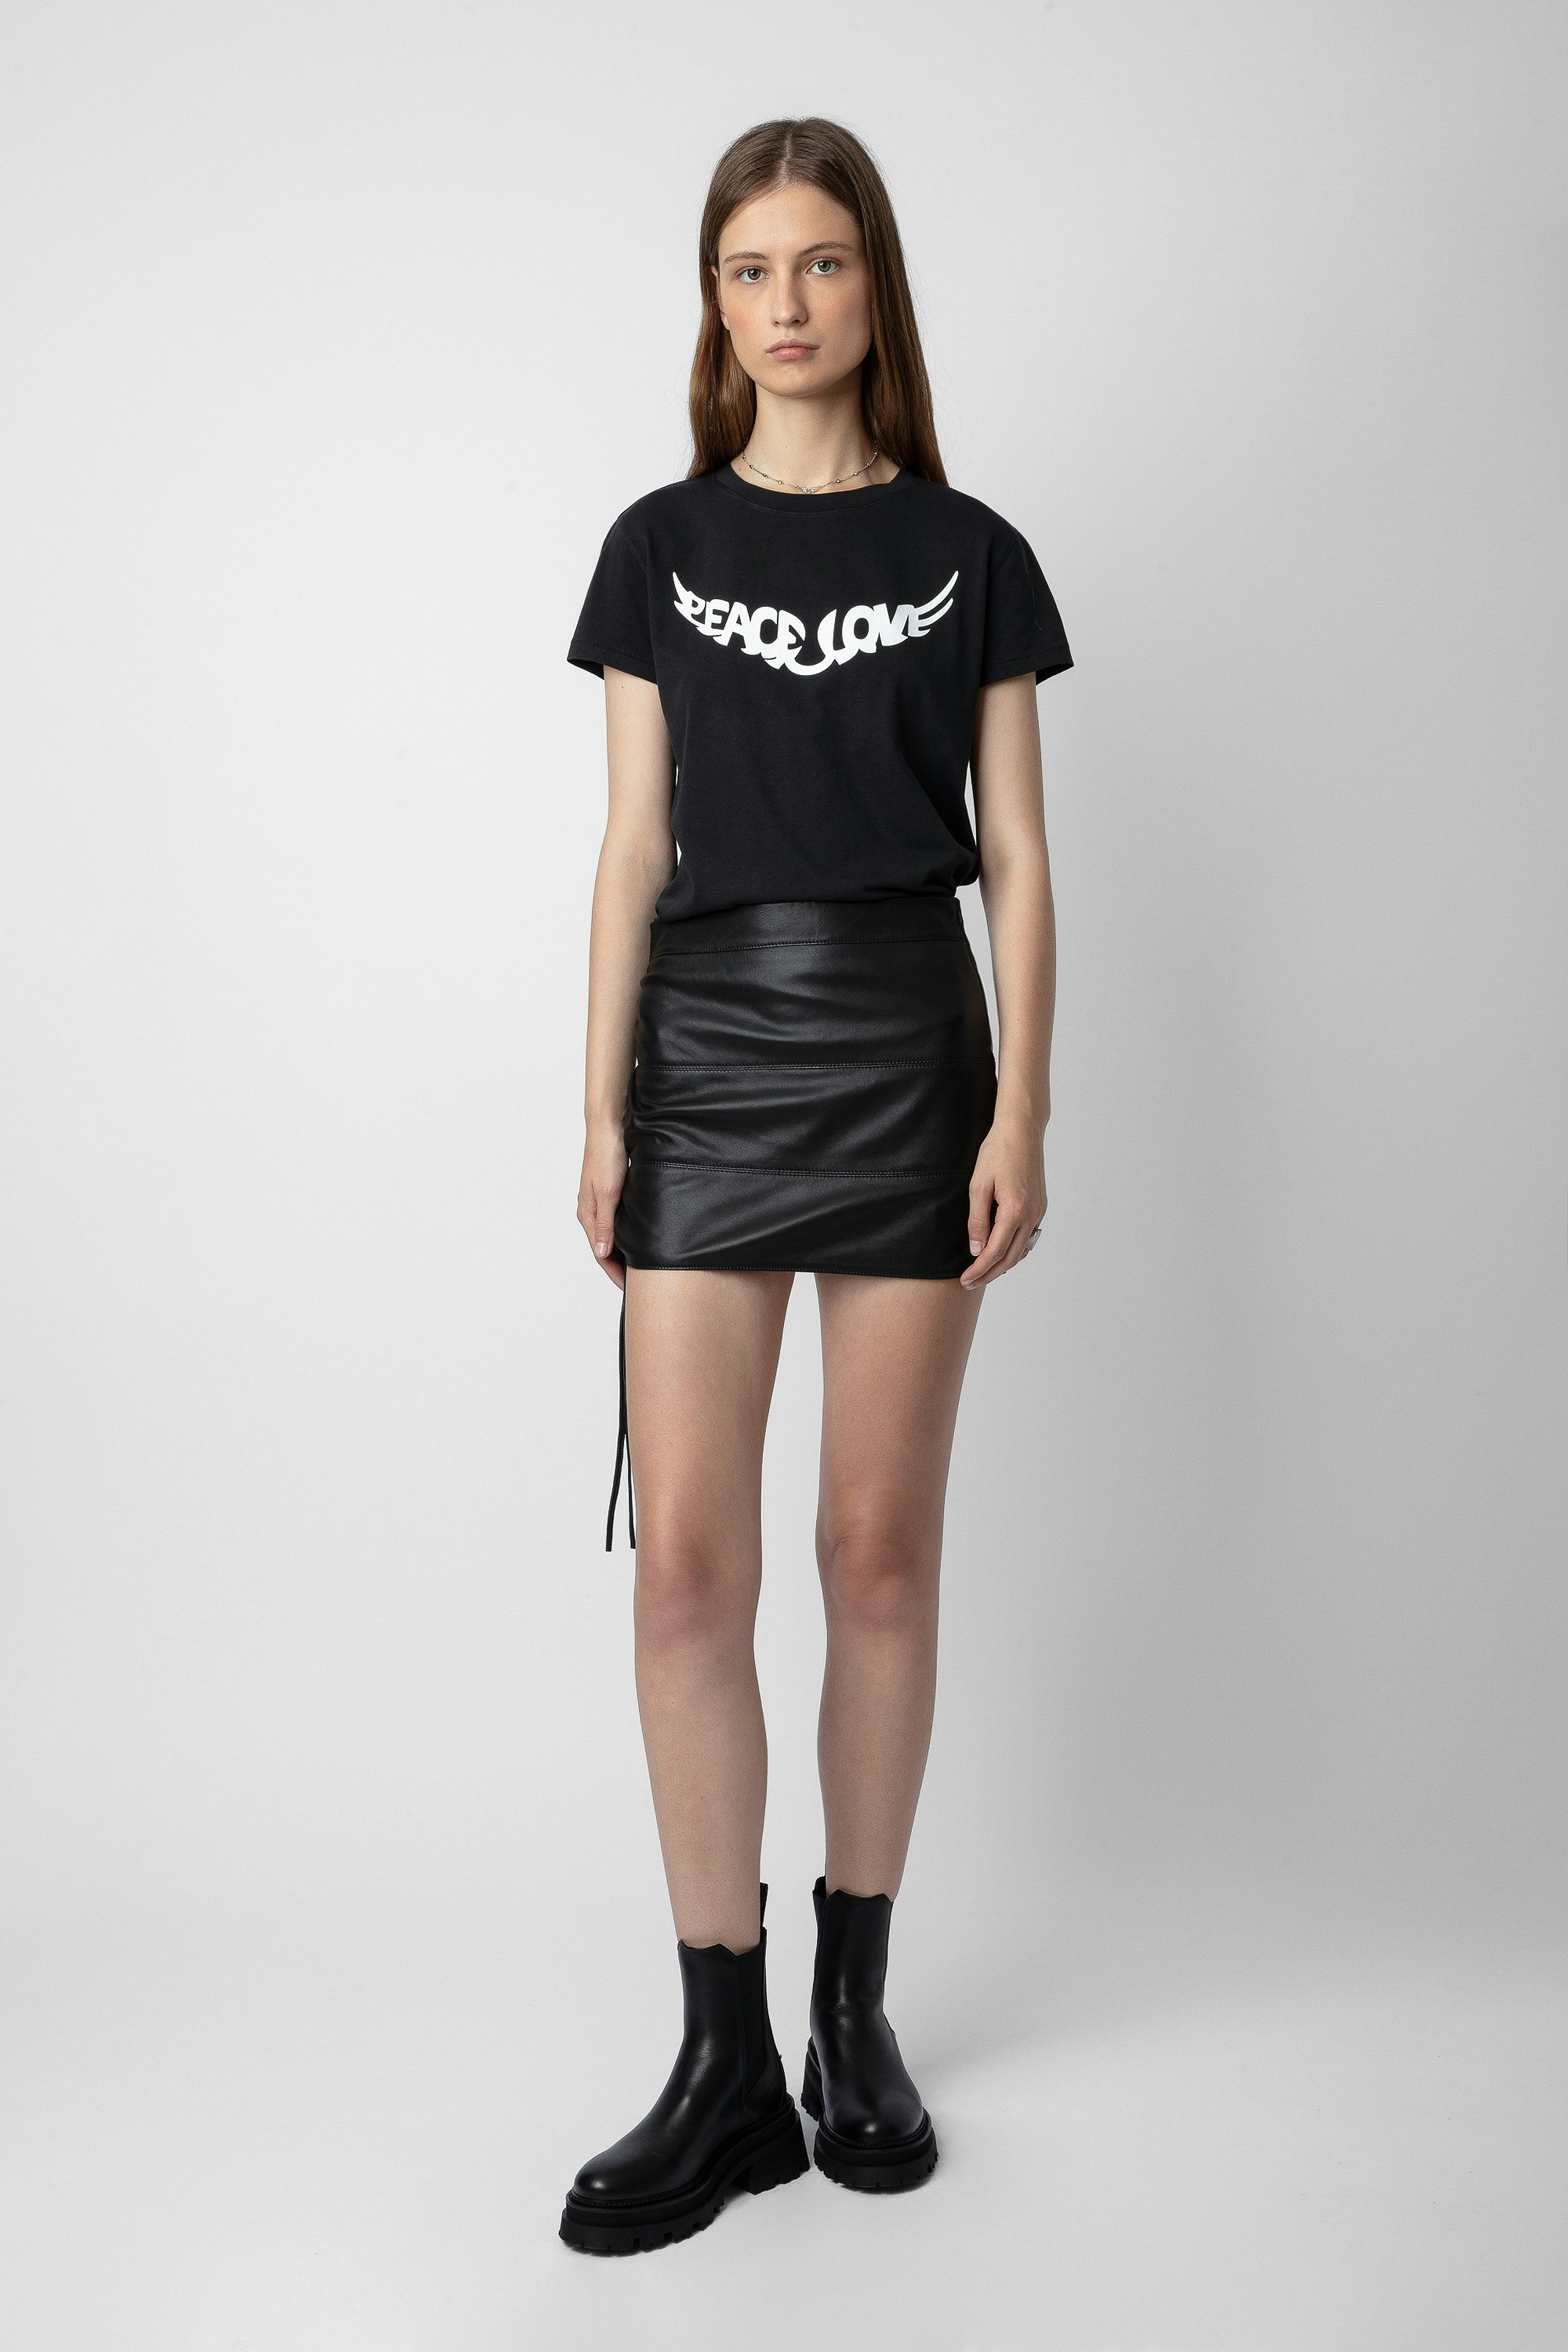 Jylo Leather Skirt - Women’s short black leather skirt with drawstrings and openings.